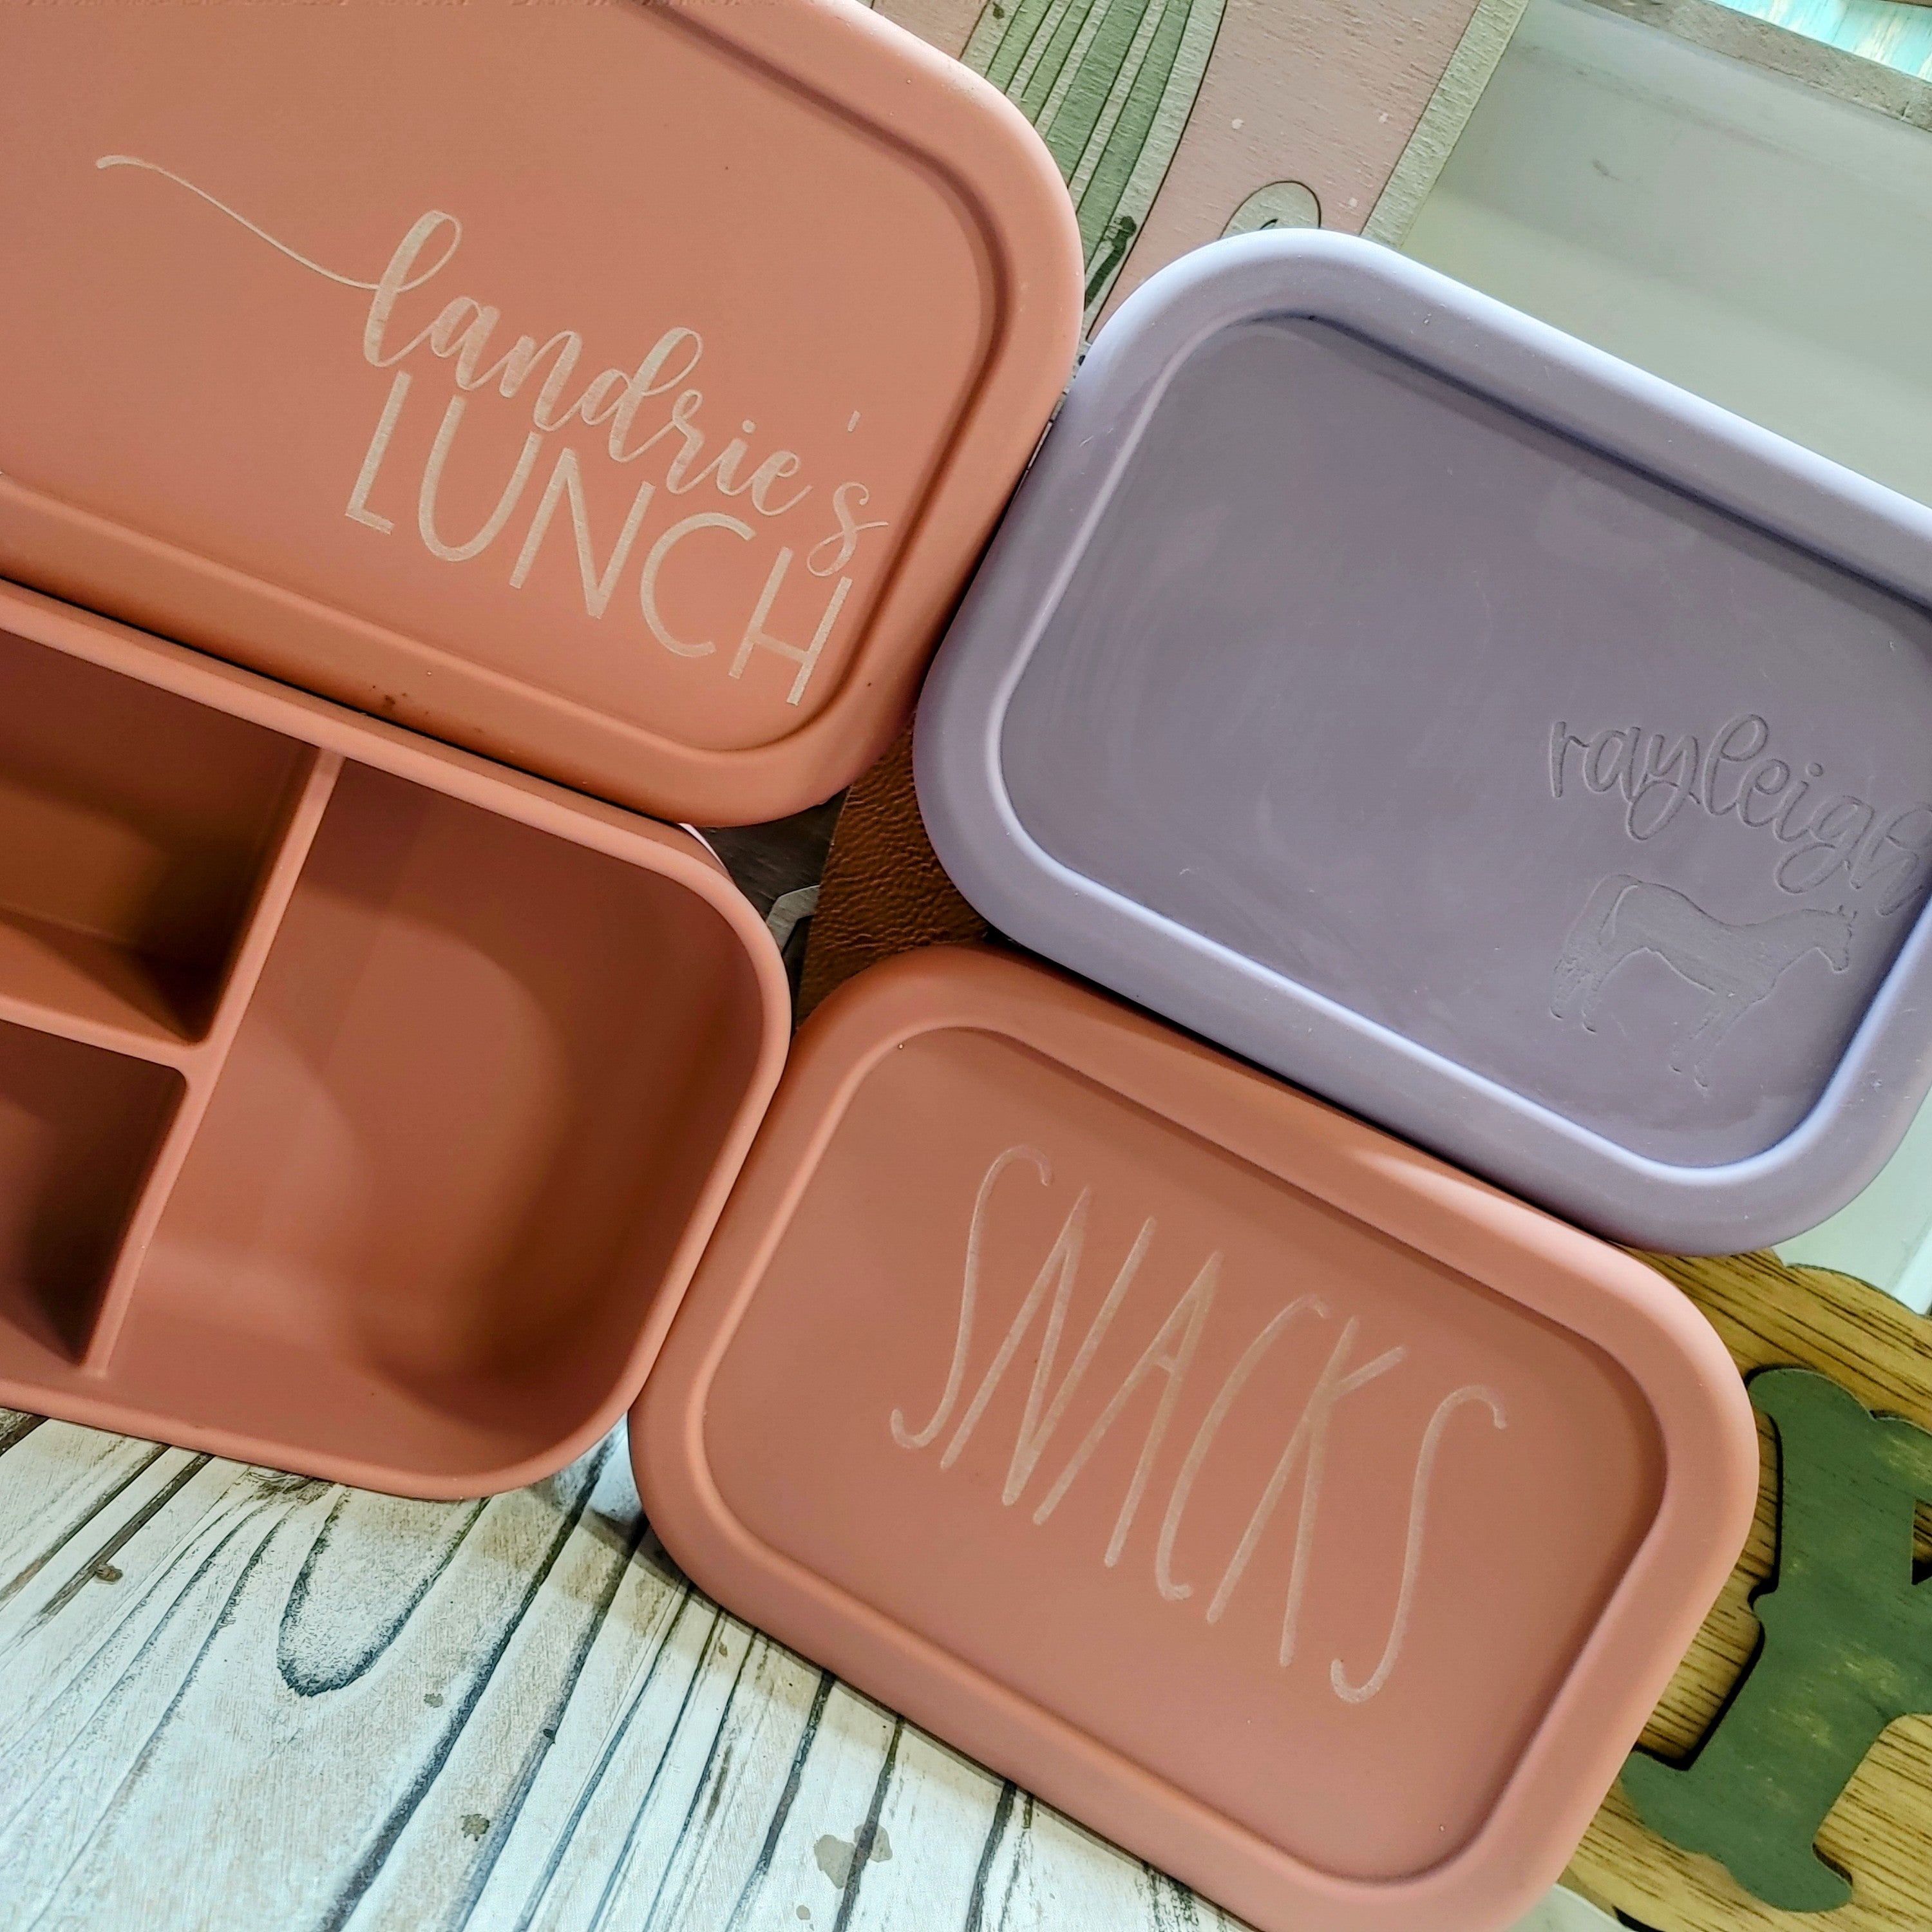 Custom Silicone Lunch Box with Personalization for Child, School Meal  Container with Name, Snack Box, Reusable Container for Work